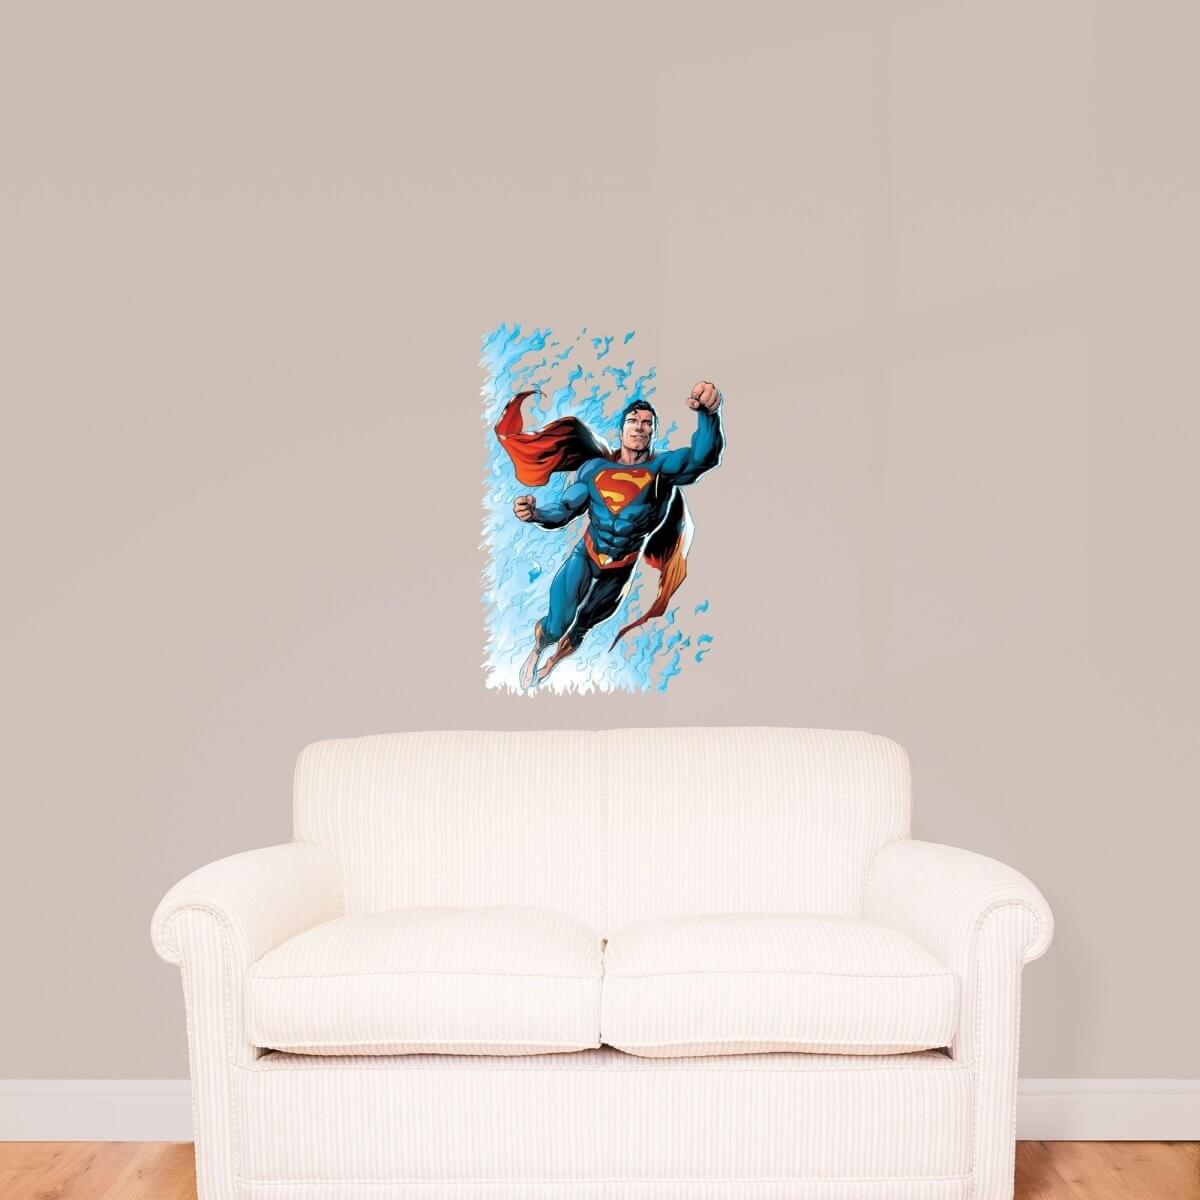 Kismet Decals Action Comics #976 Comic Cover Series Licensed Wall Sticker - Easy DIY Home & Room Decor Wall Art - Kismet Decals